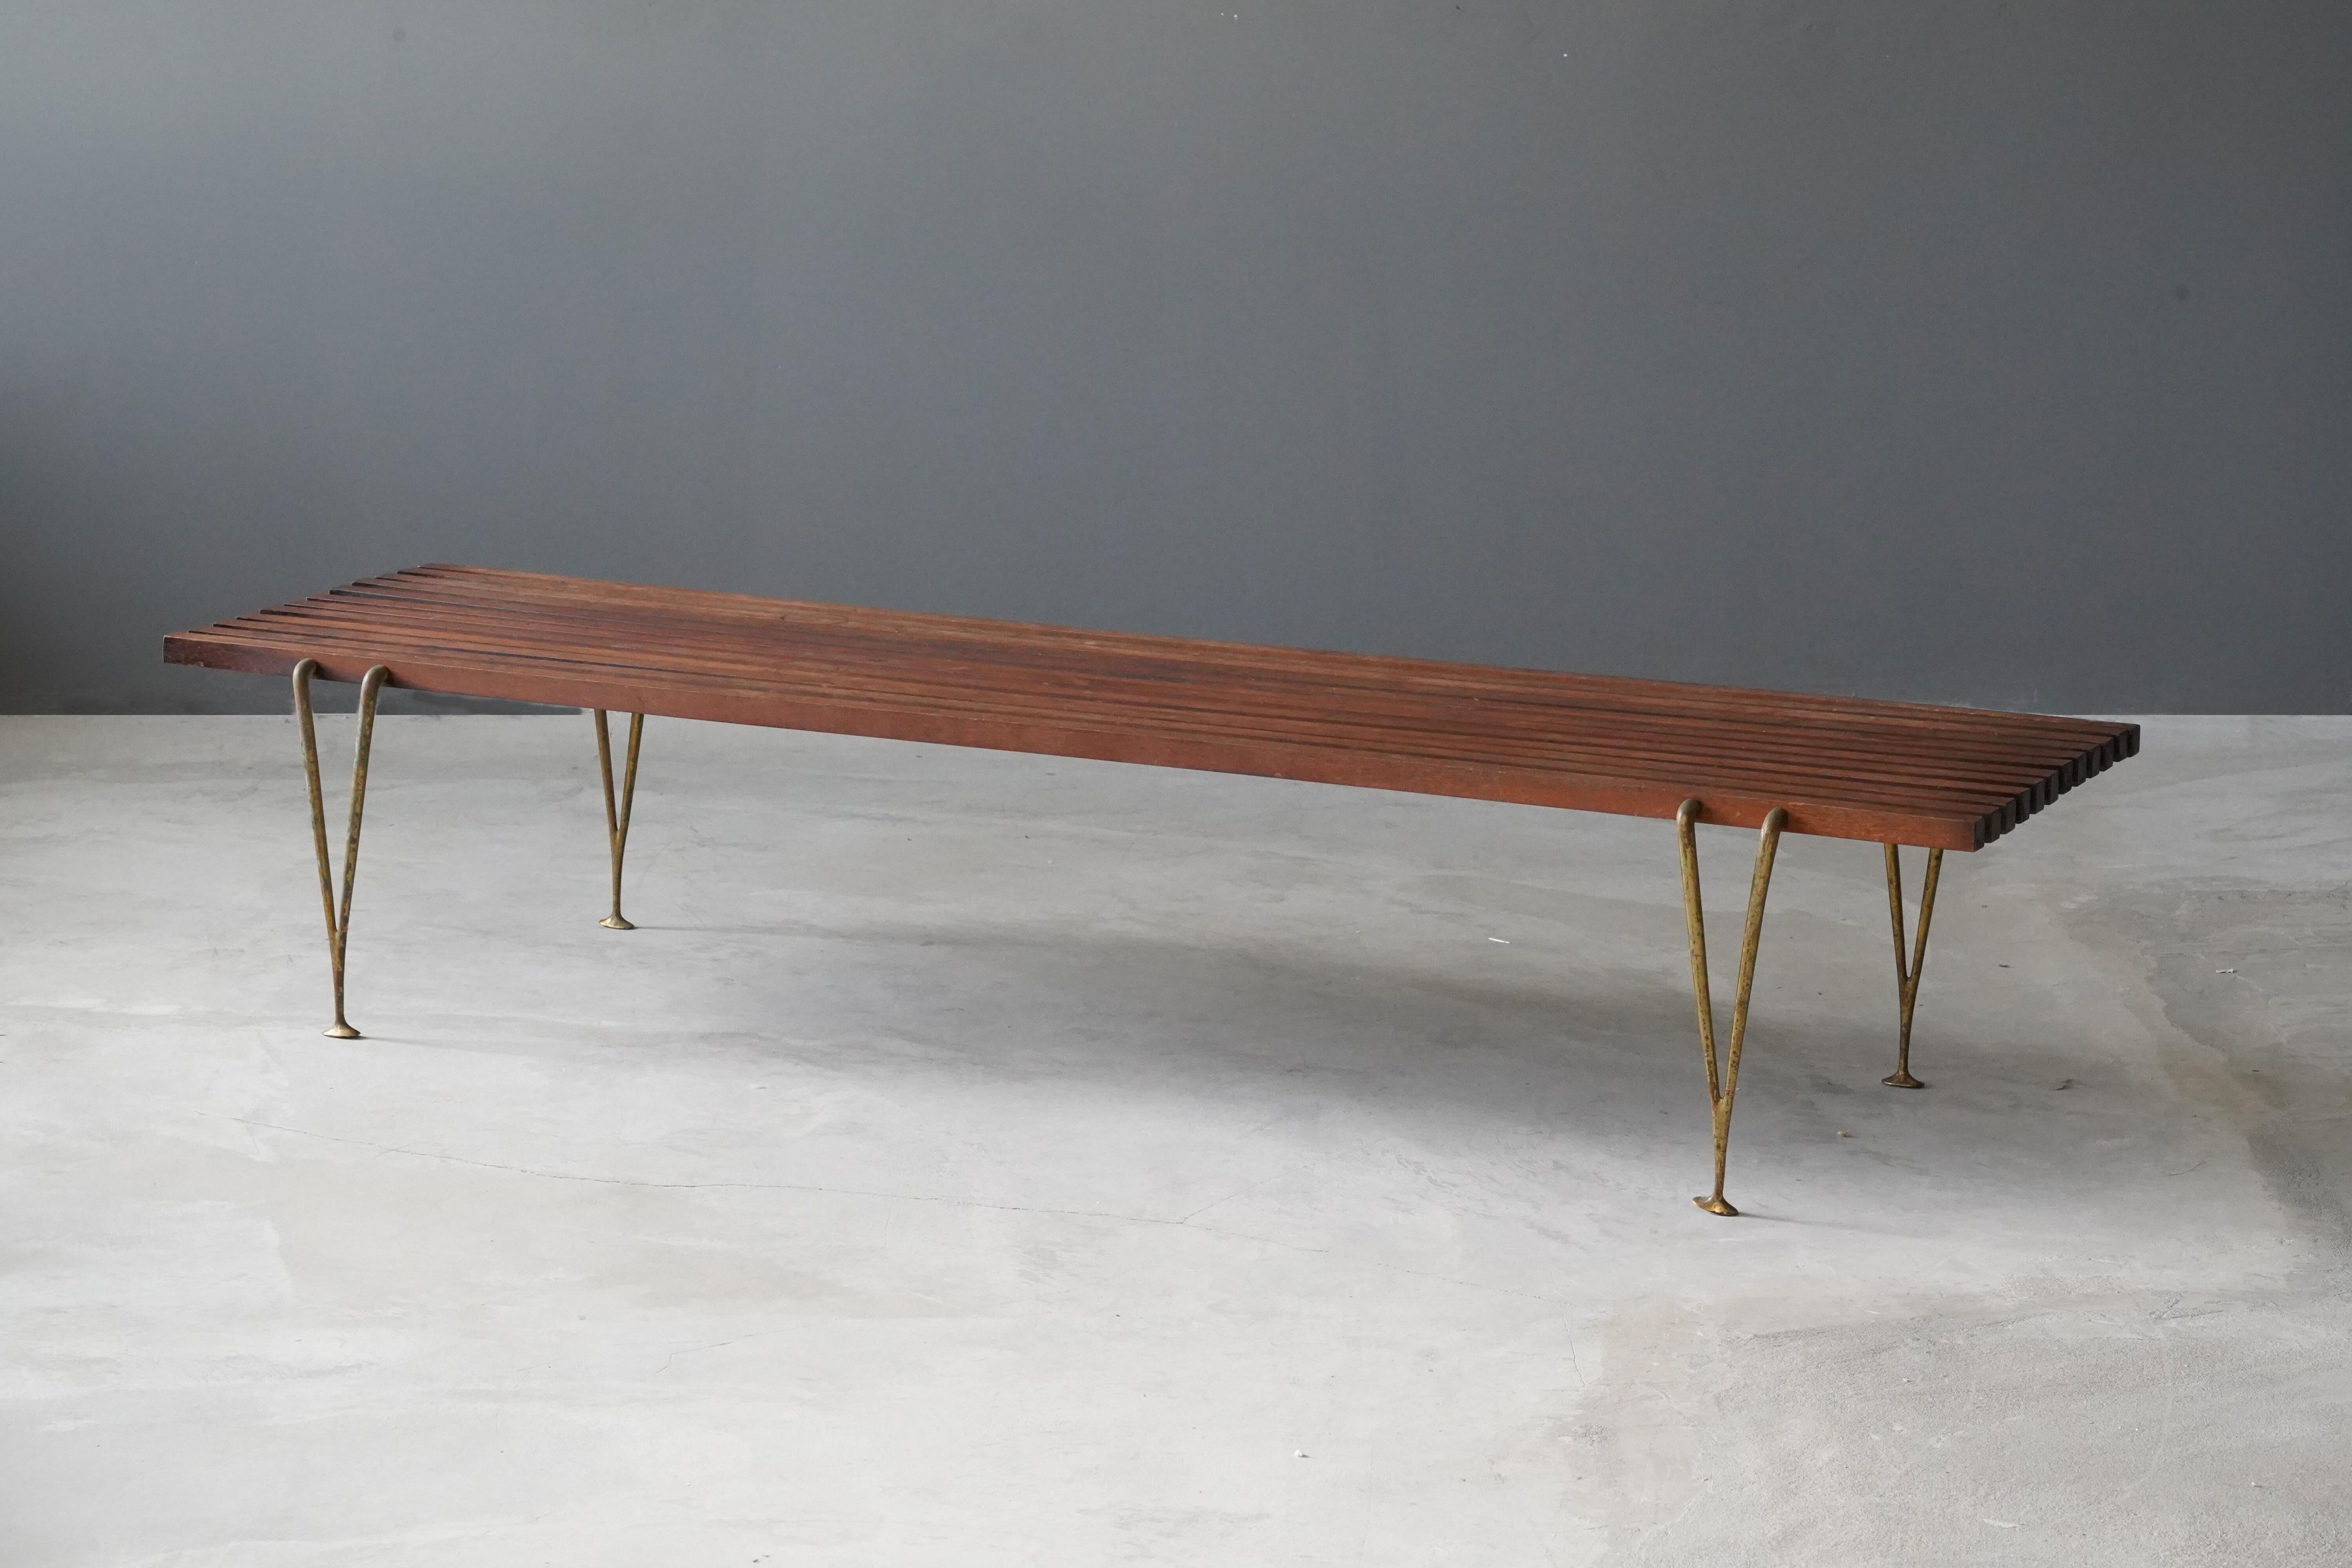 A sizable bench, designed and produced by Hugh Acton, artists studio Hugh Acton, Inc. Kalamazoo, Michigan, c. 1954. Features walnut and brass legs.

Other designers of the period include Paul Mccobb, Florence Knoll, Donald Judd, Charlotte